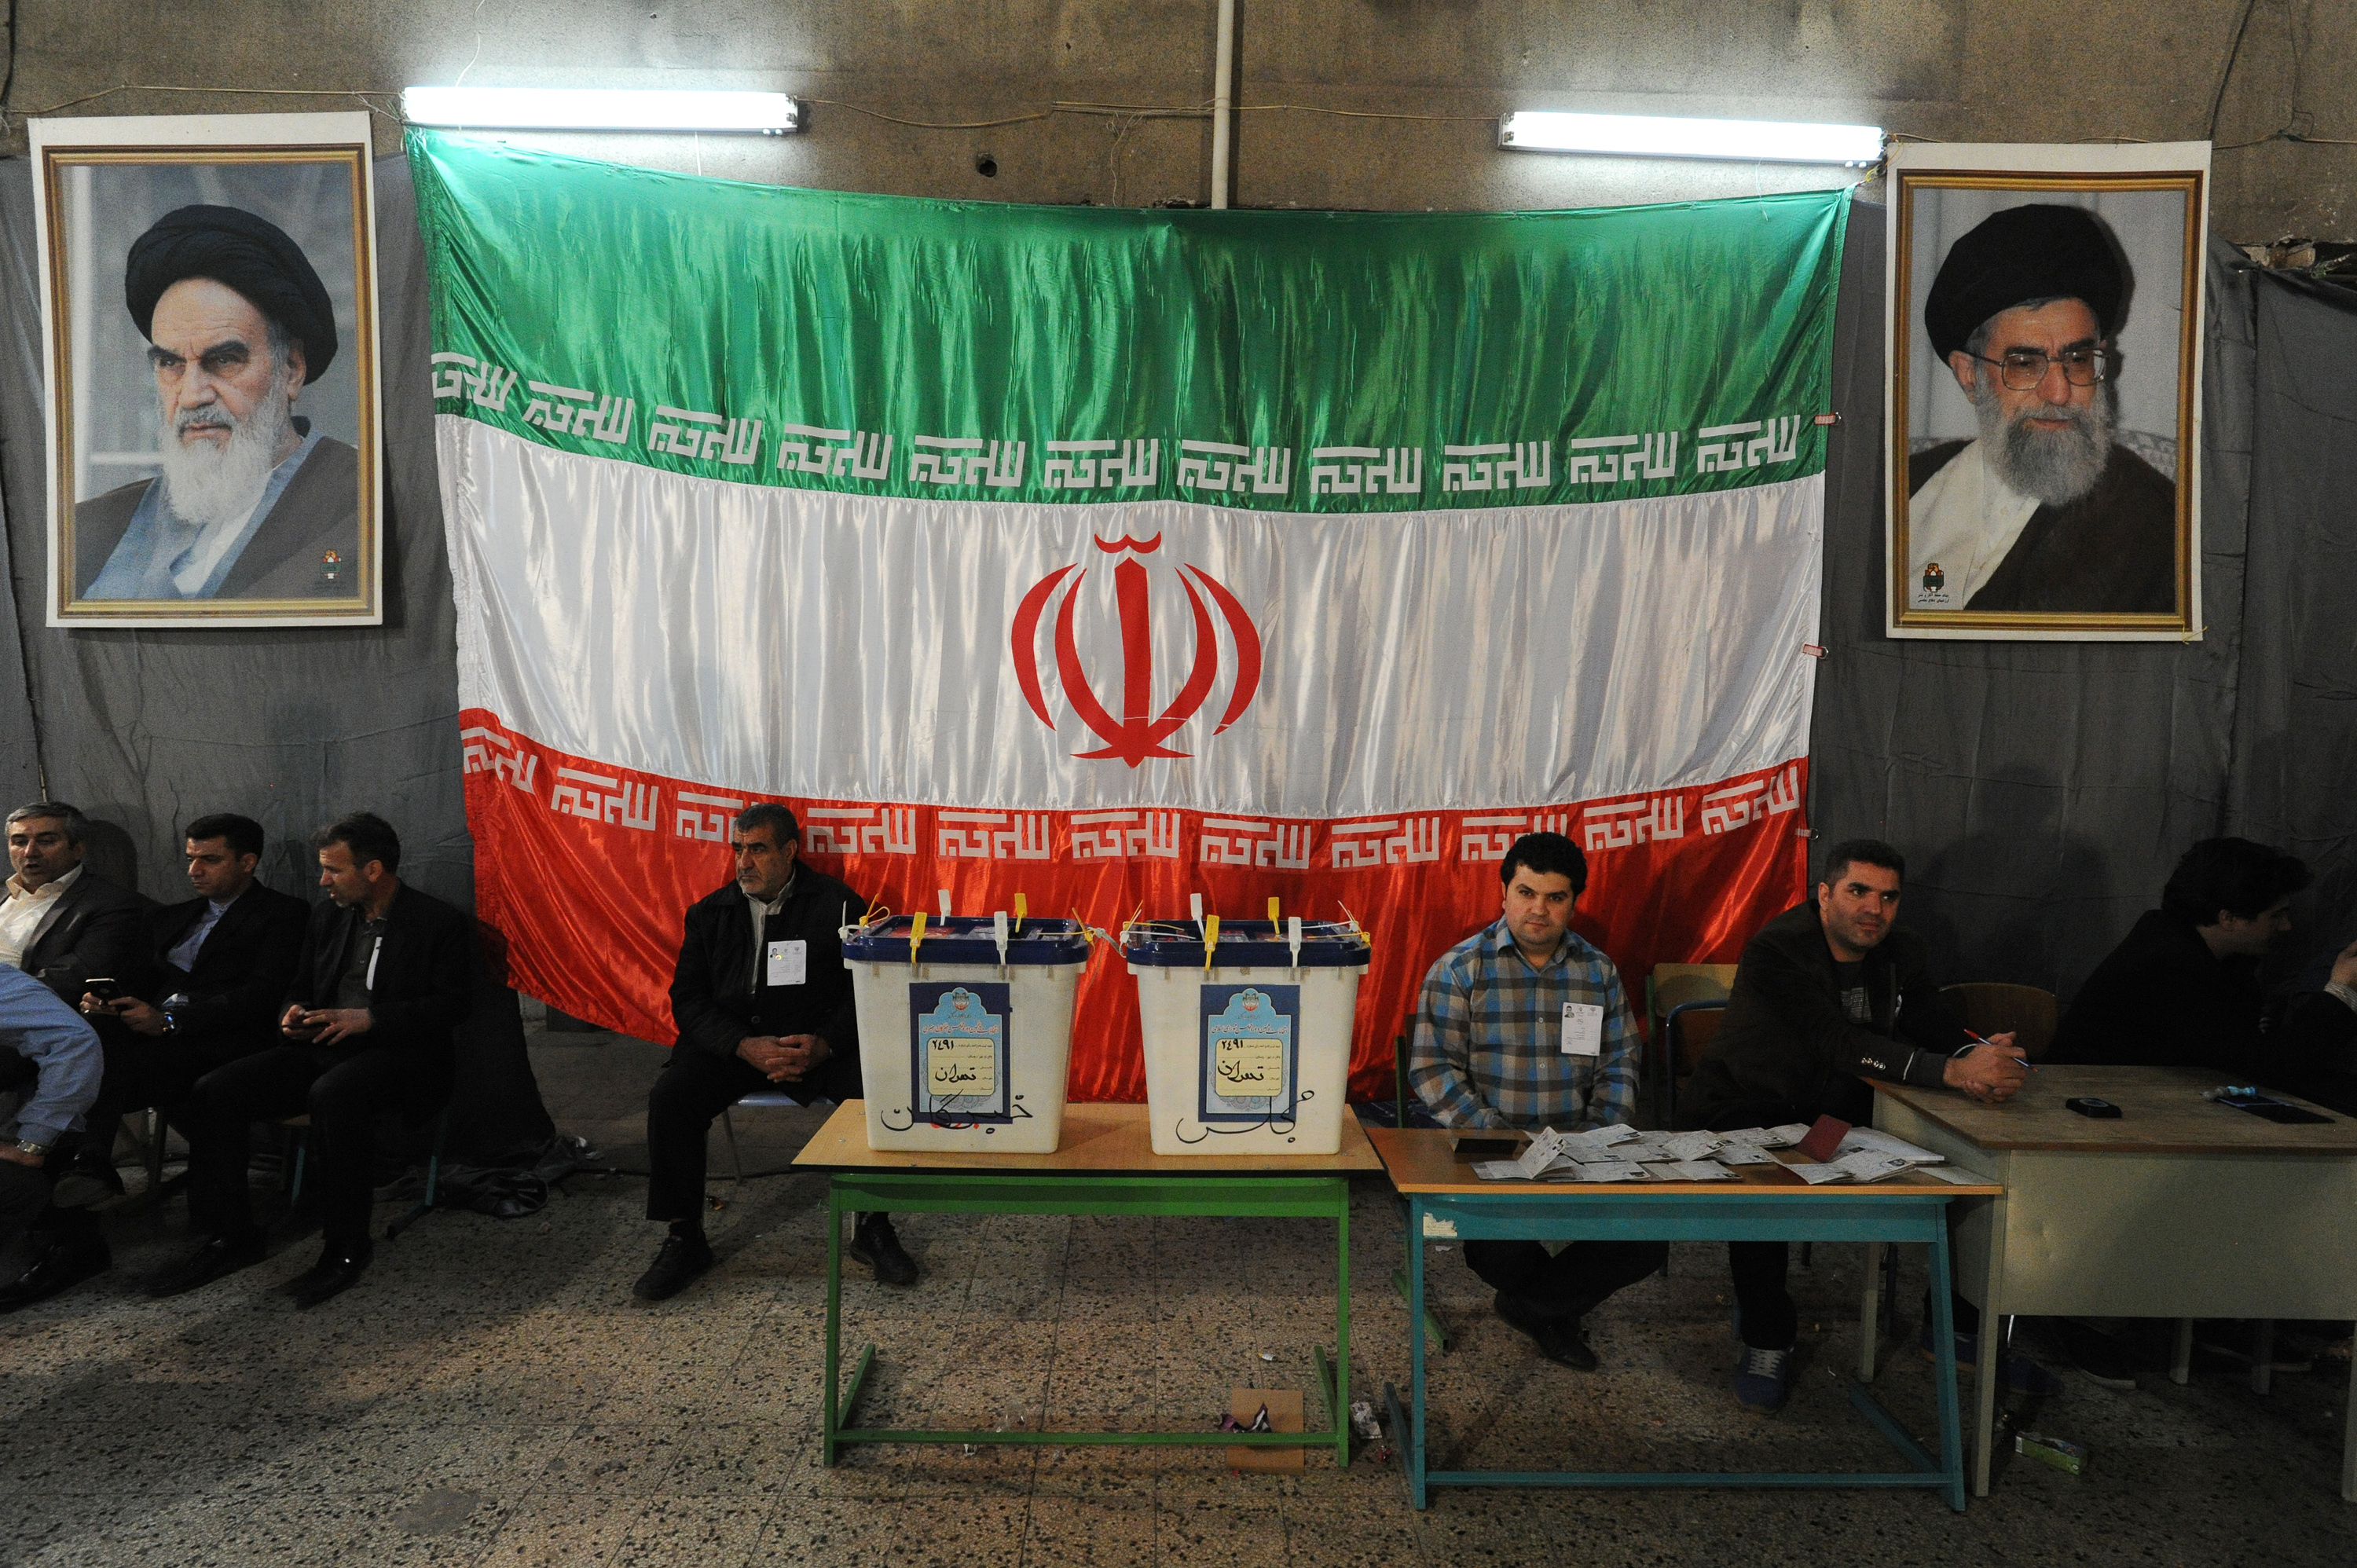 Iranians vote in key elections for Parliament and the Assembly of Experts at the Rasoul mosque in the Nazi Abad district of south Tehran on Feb. 26, 2016. (Scott Peterson—Getty Images)